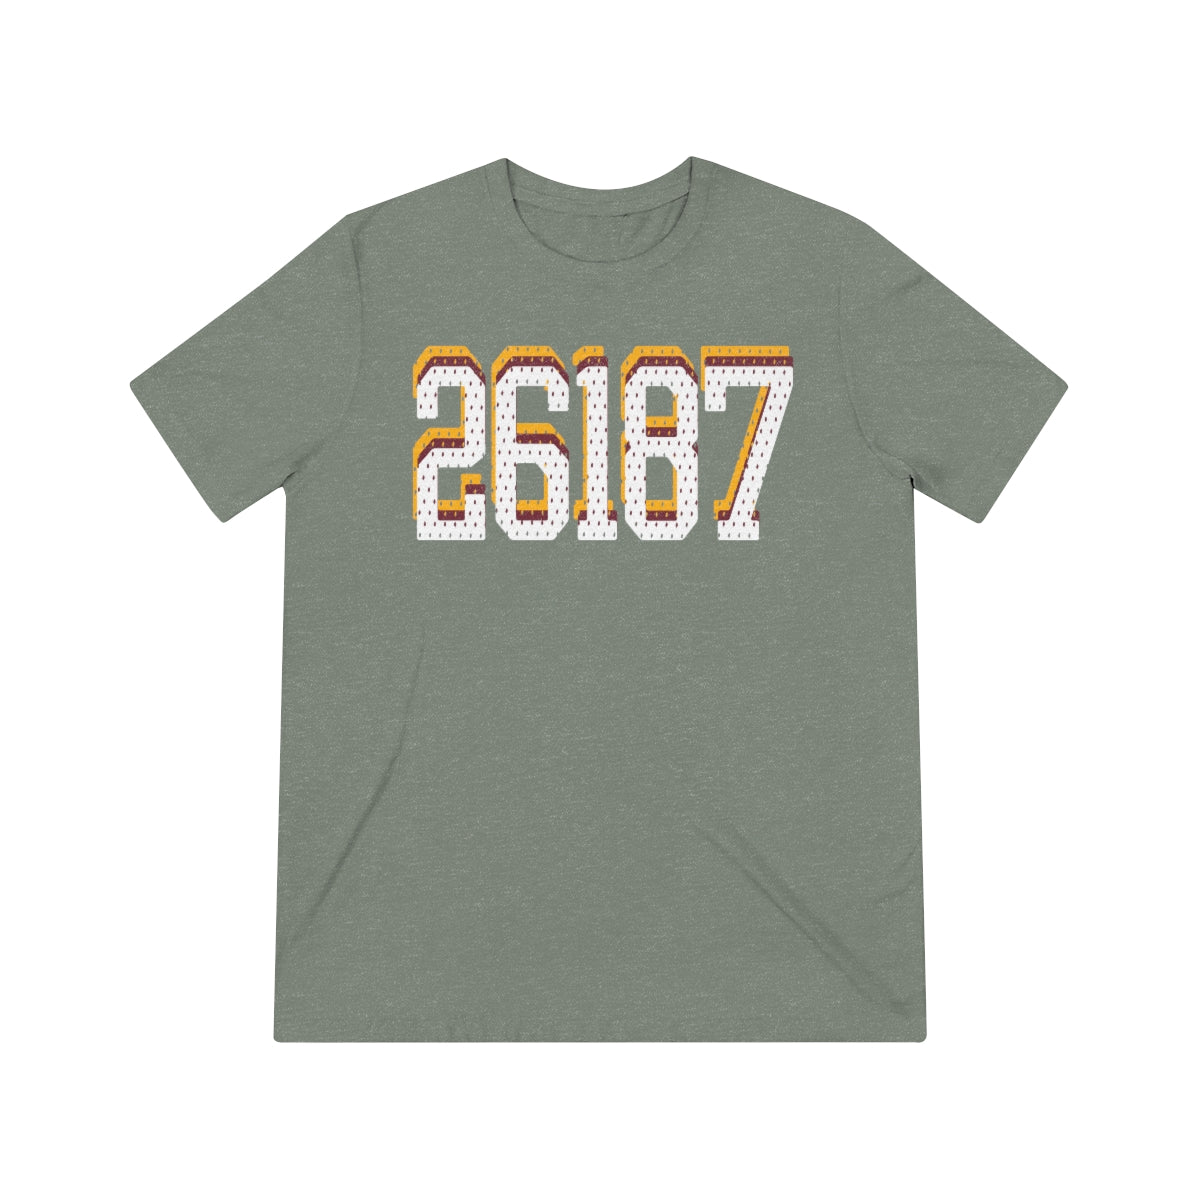 26187-Dimensions-Jersey Mesh-Unisex Triblend Tee